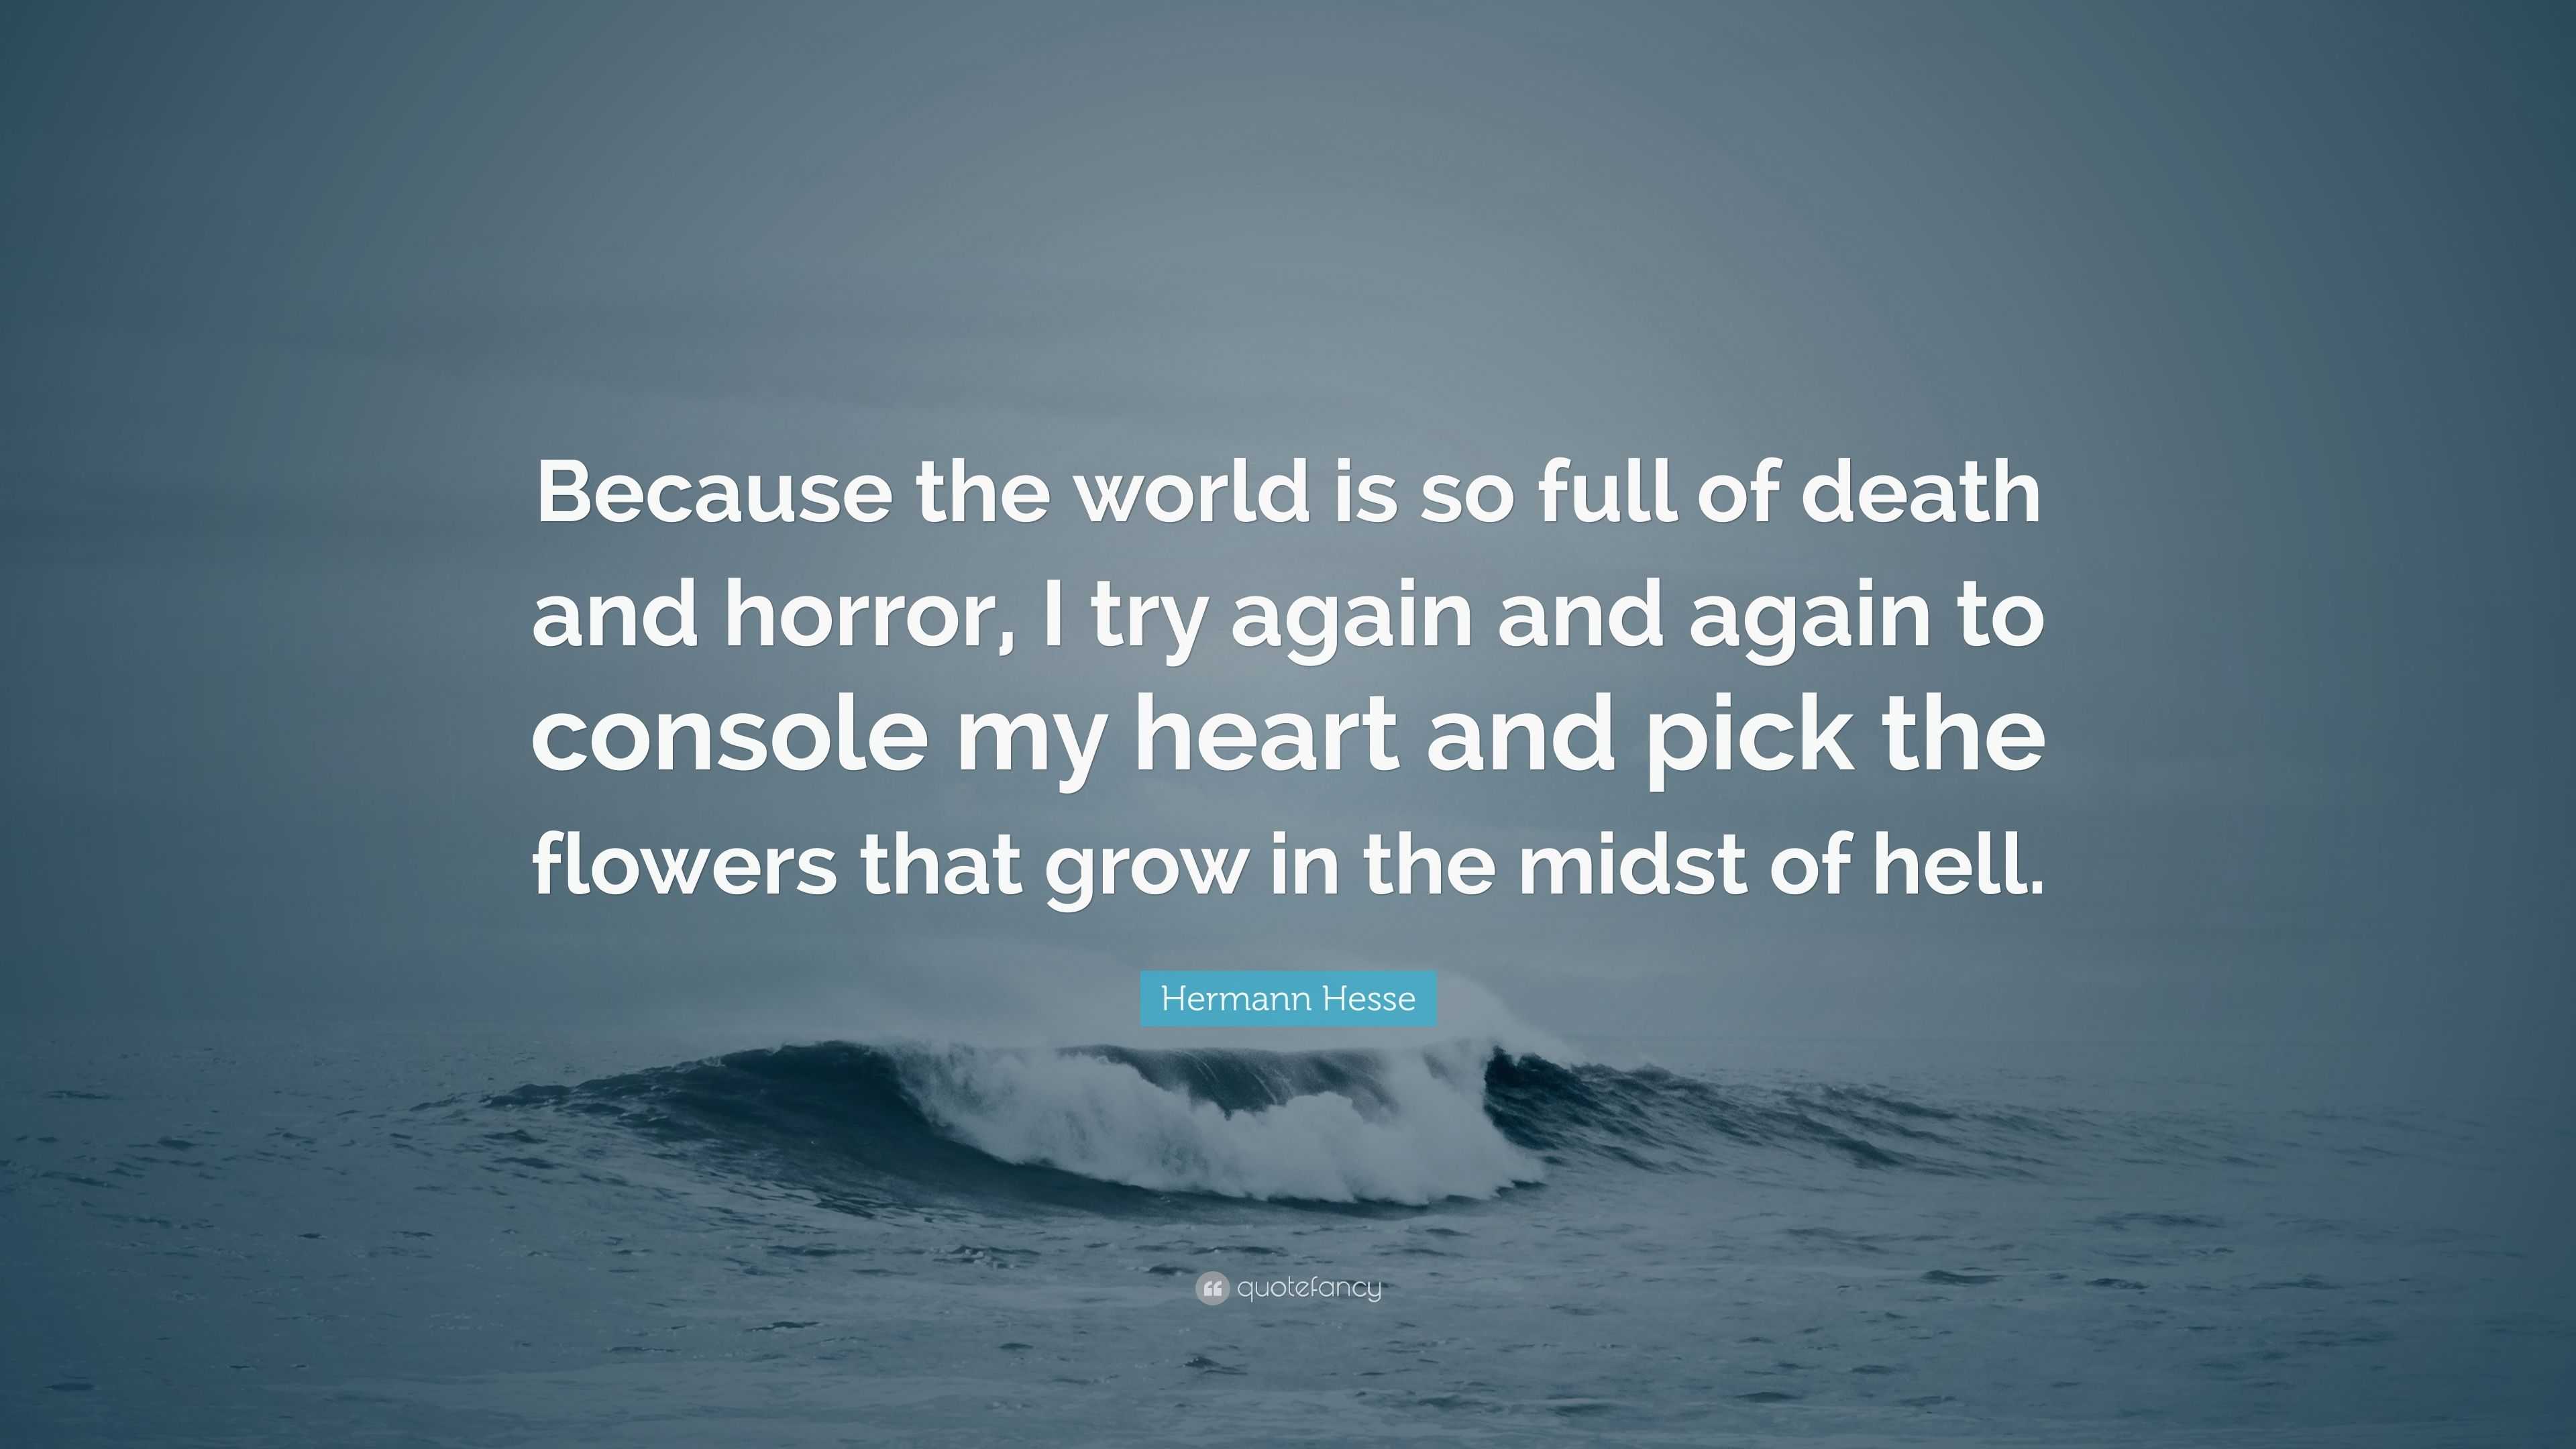 Hermann Hesse Quote: “Because the world is so full of death and horror ...